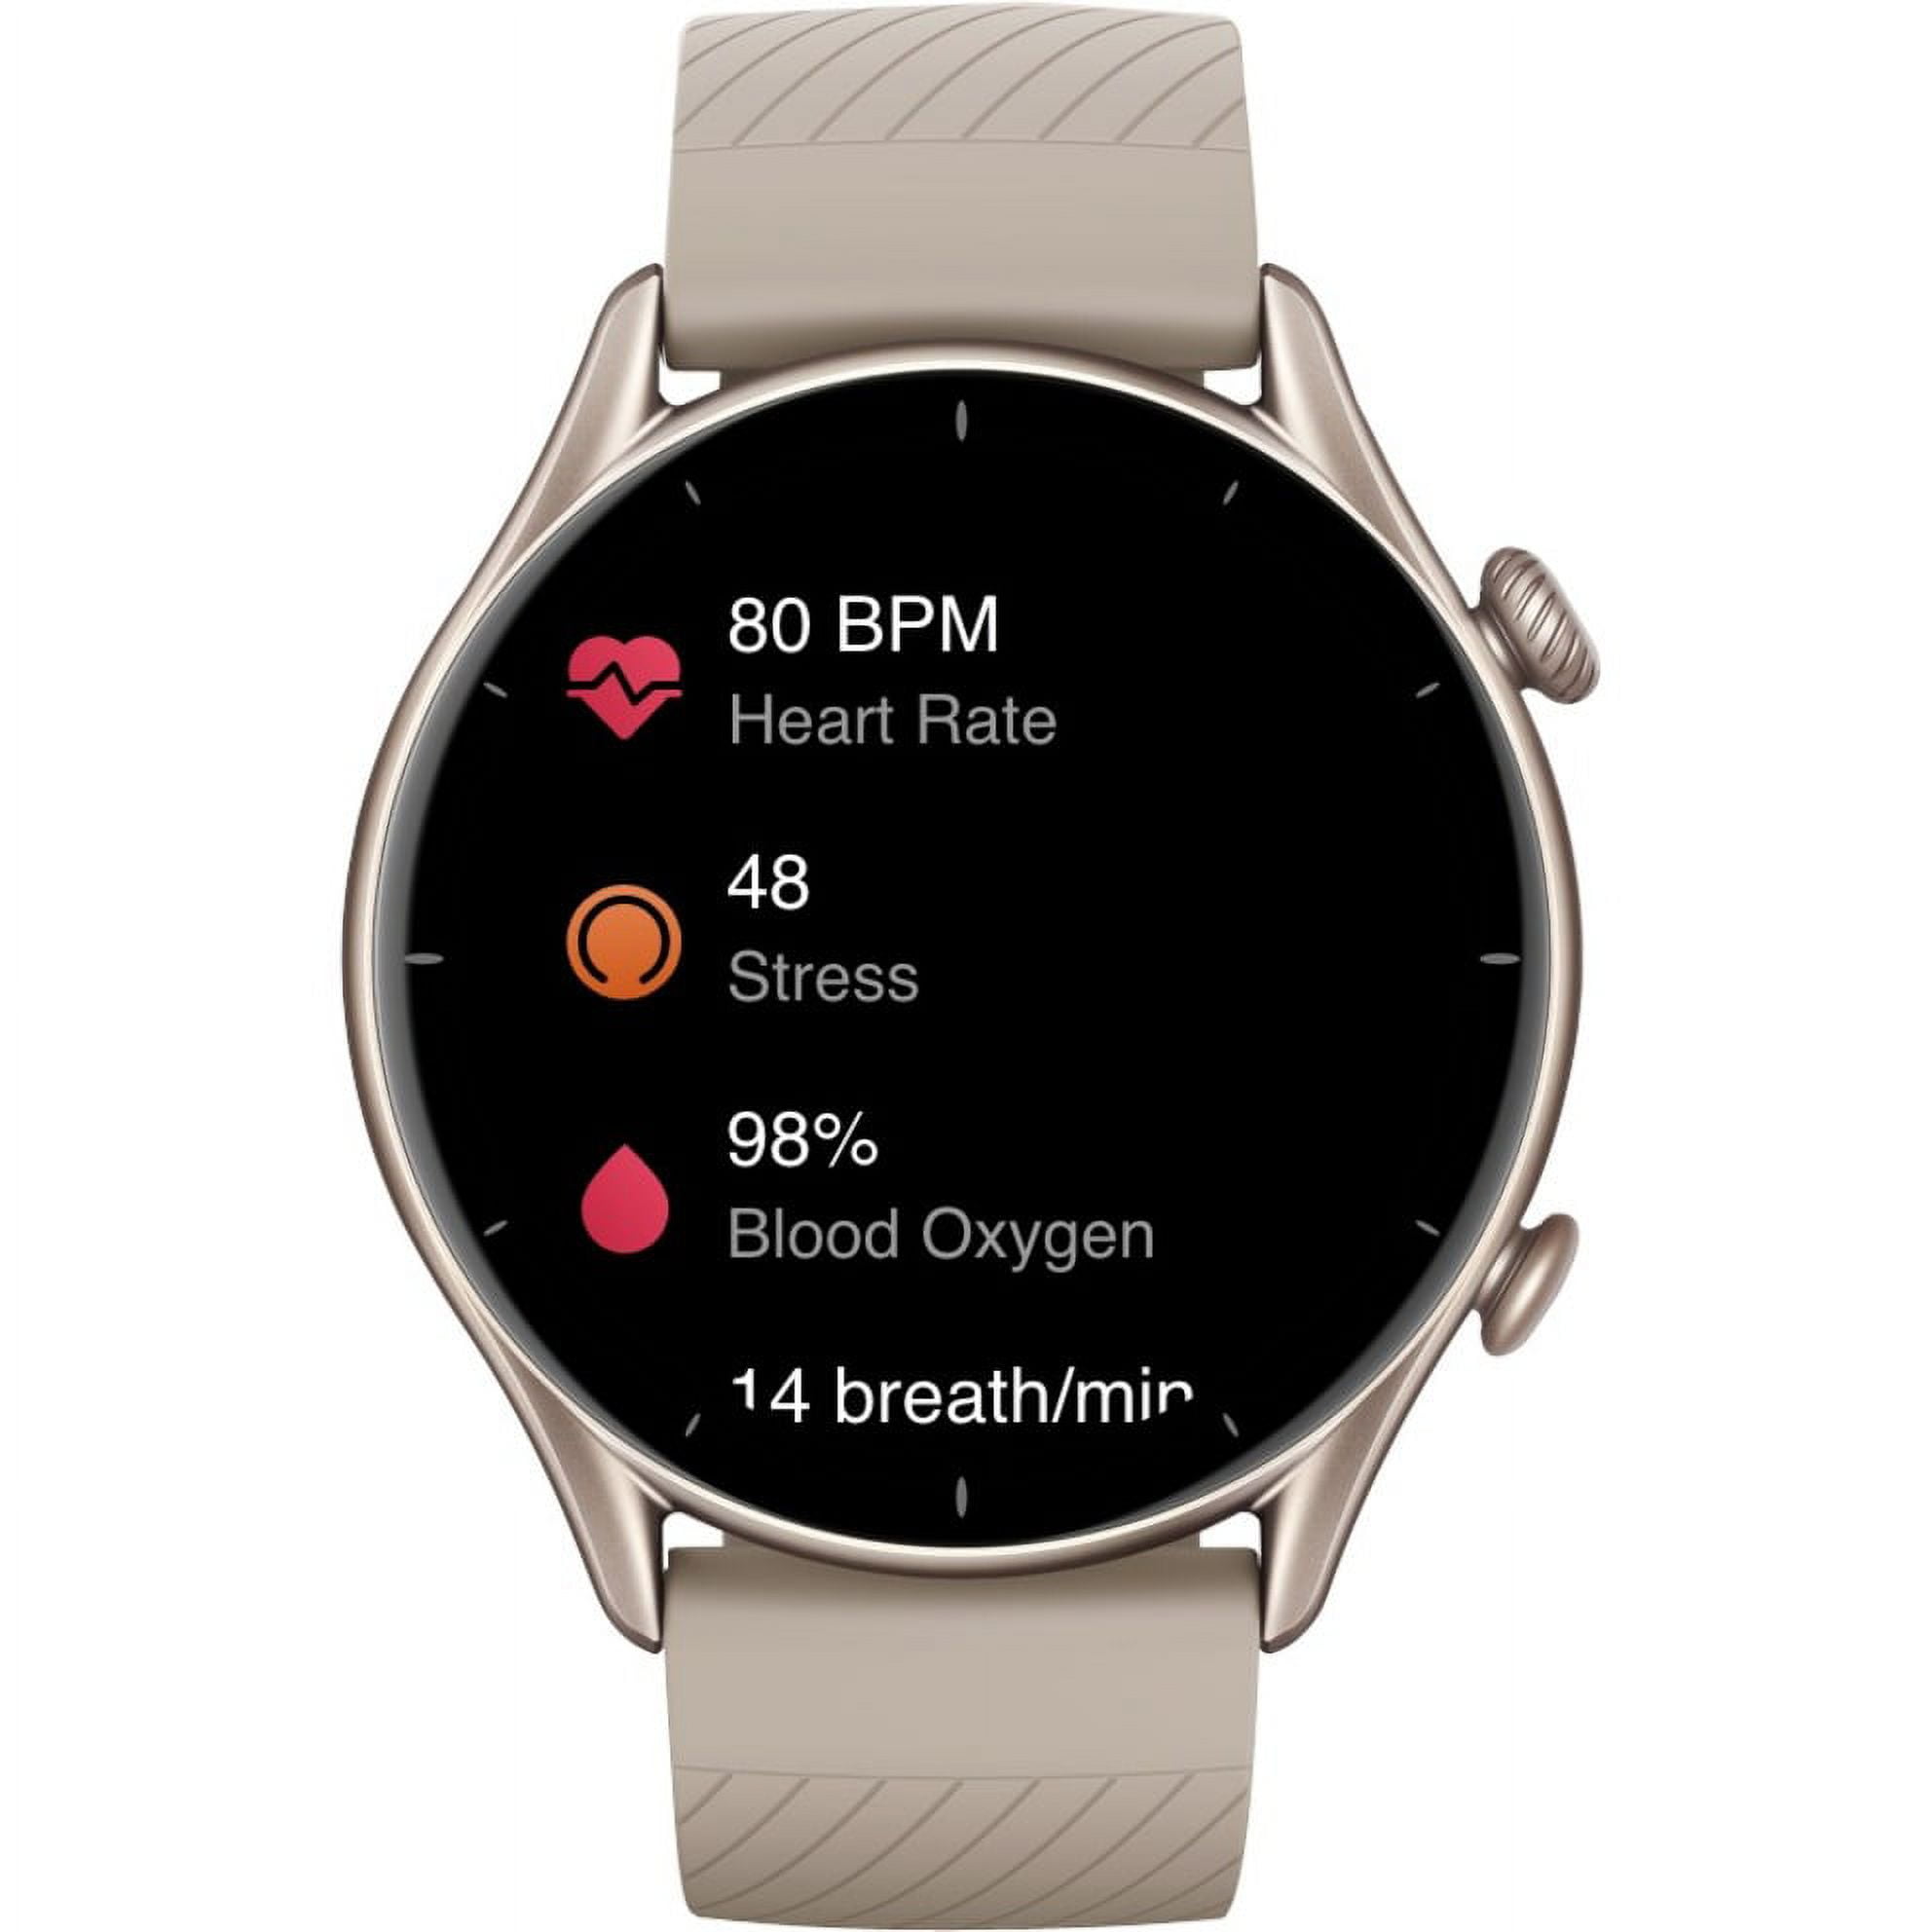 Amazfit GTR Smartwatch, 1.39'' AMOLDED Display 24/7 Heart Rate Monitor, 24  Day Batter Life, 12 Sports Modes(47mm, GPS, Bluetooth), Aluminum Alloy